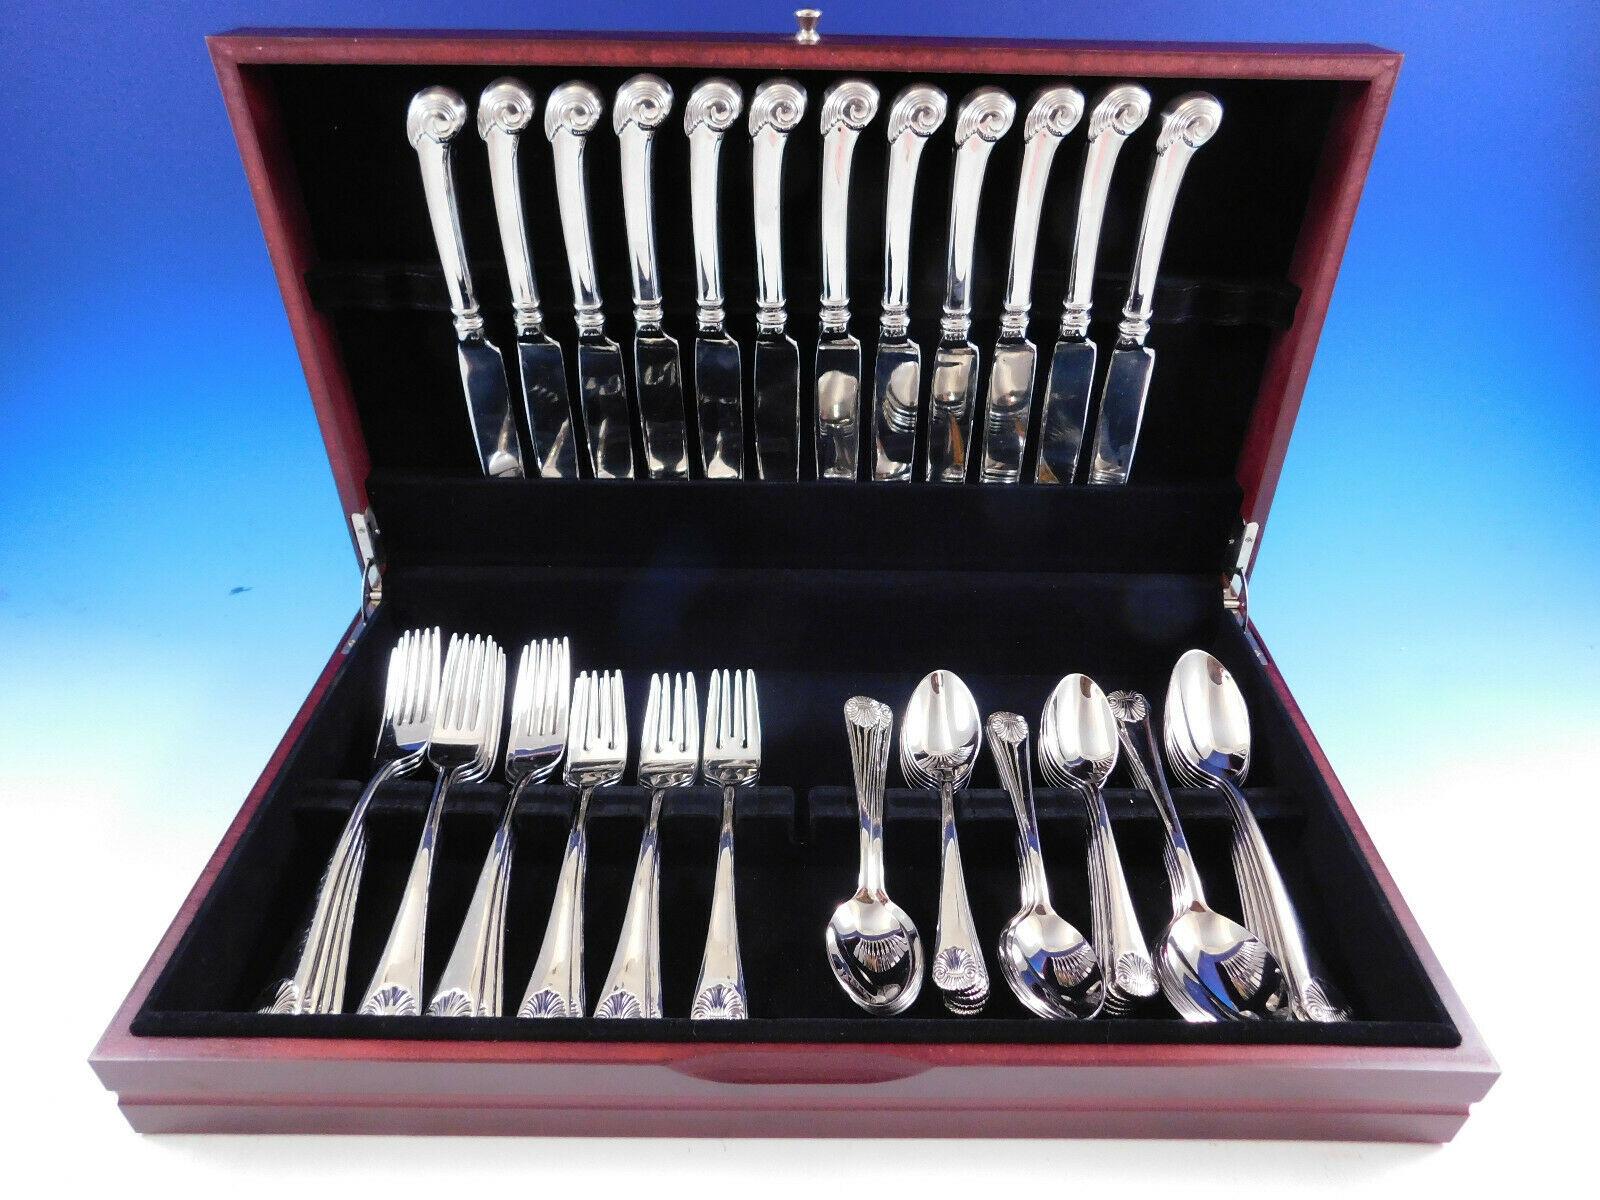 Estate Williamsburg Shell by William Roberts Stainless steel flatware set, 72 pieces. This set includes:

12 dinner knives, pistol grip, 9 5/8